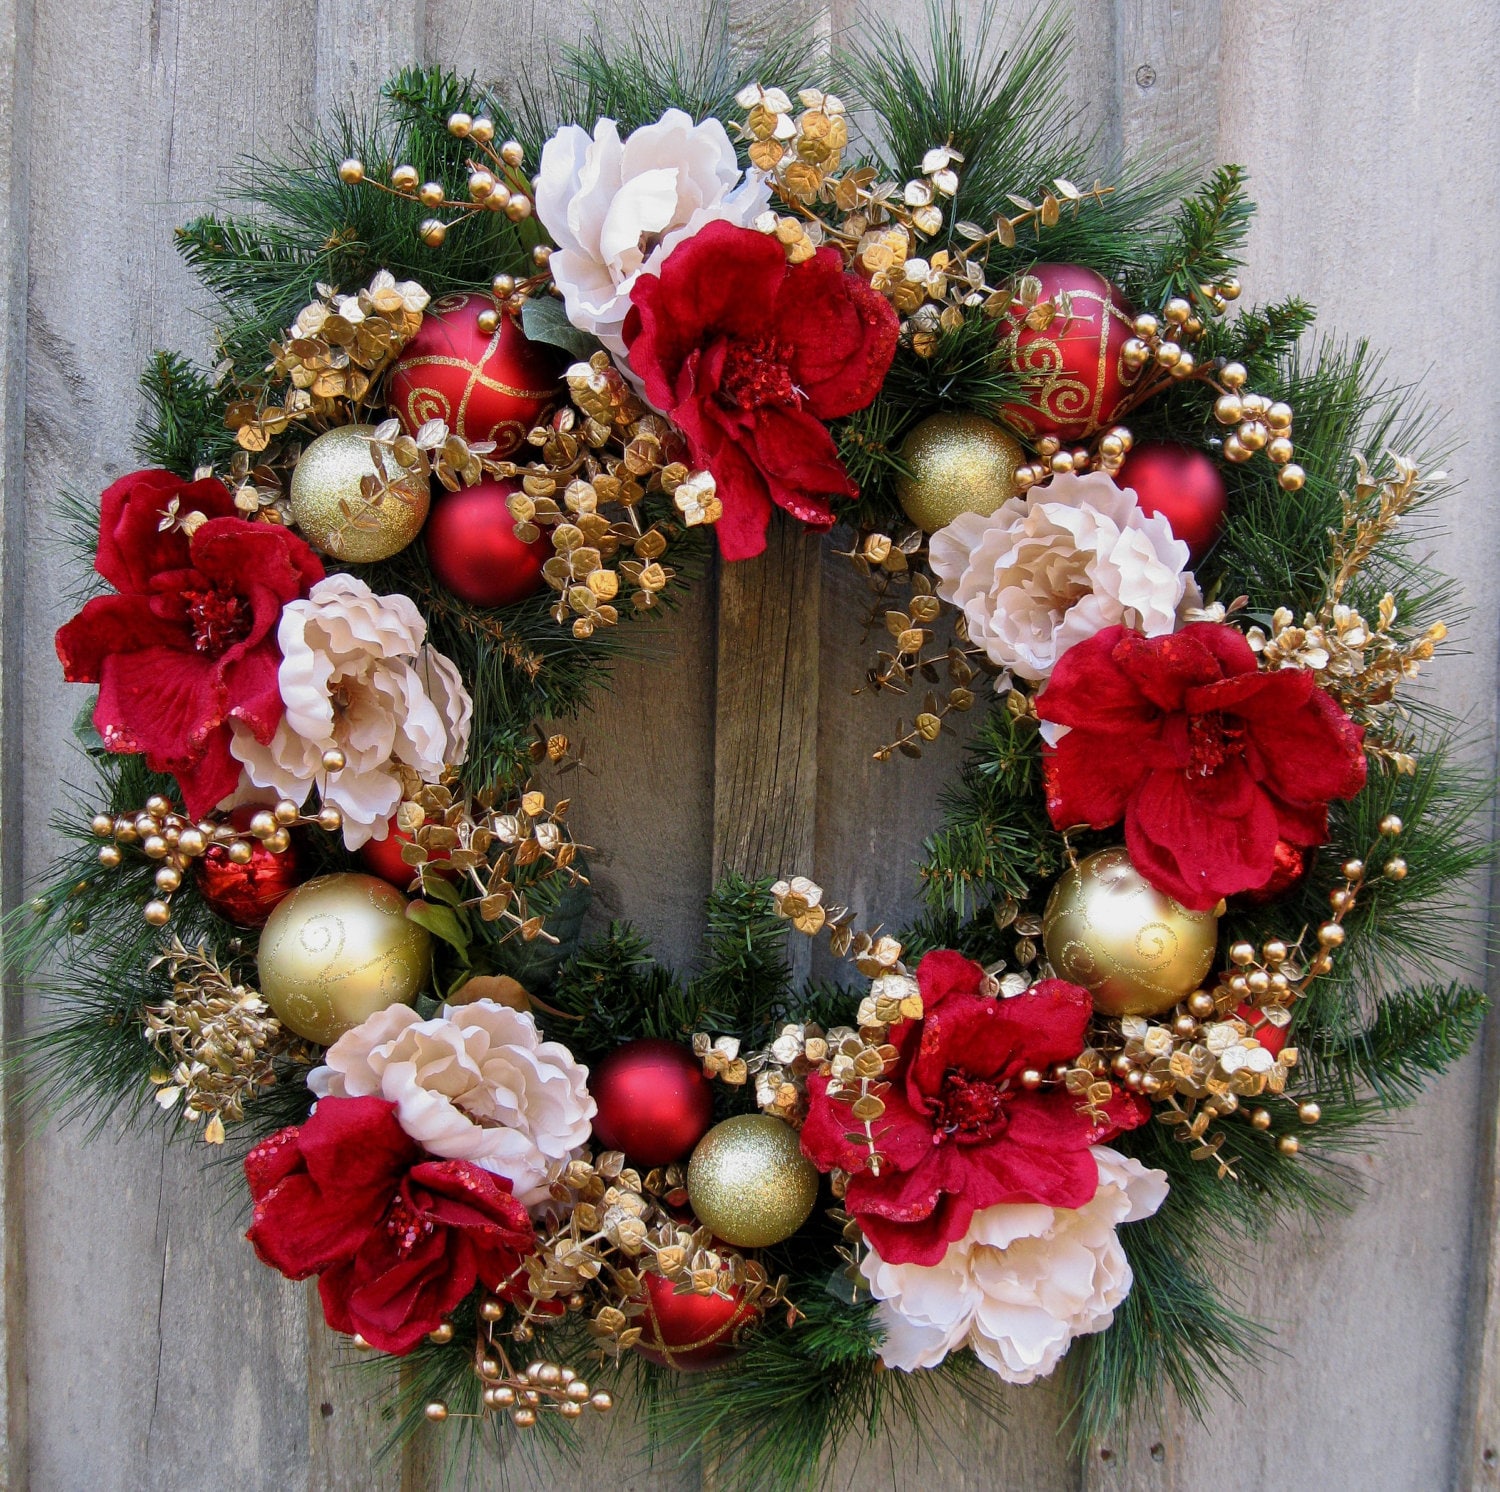 New Decorated Christmas Wreaths for Simple Design